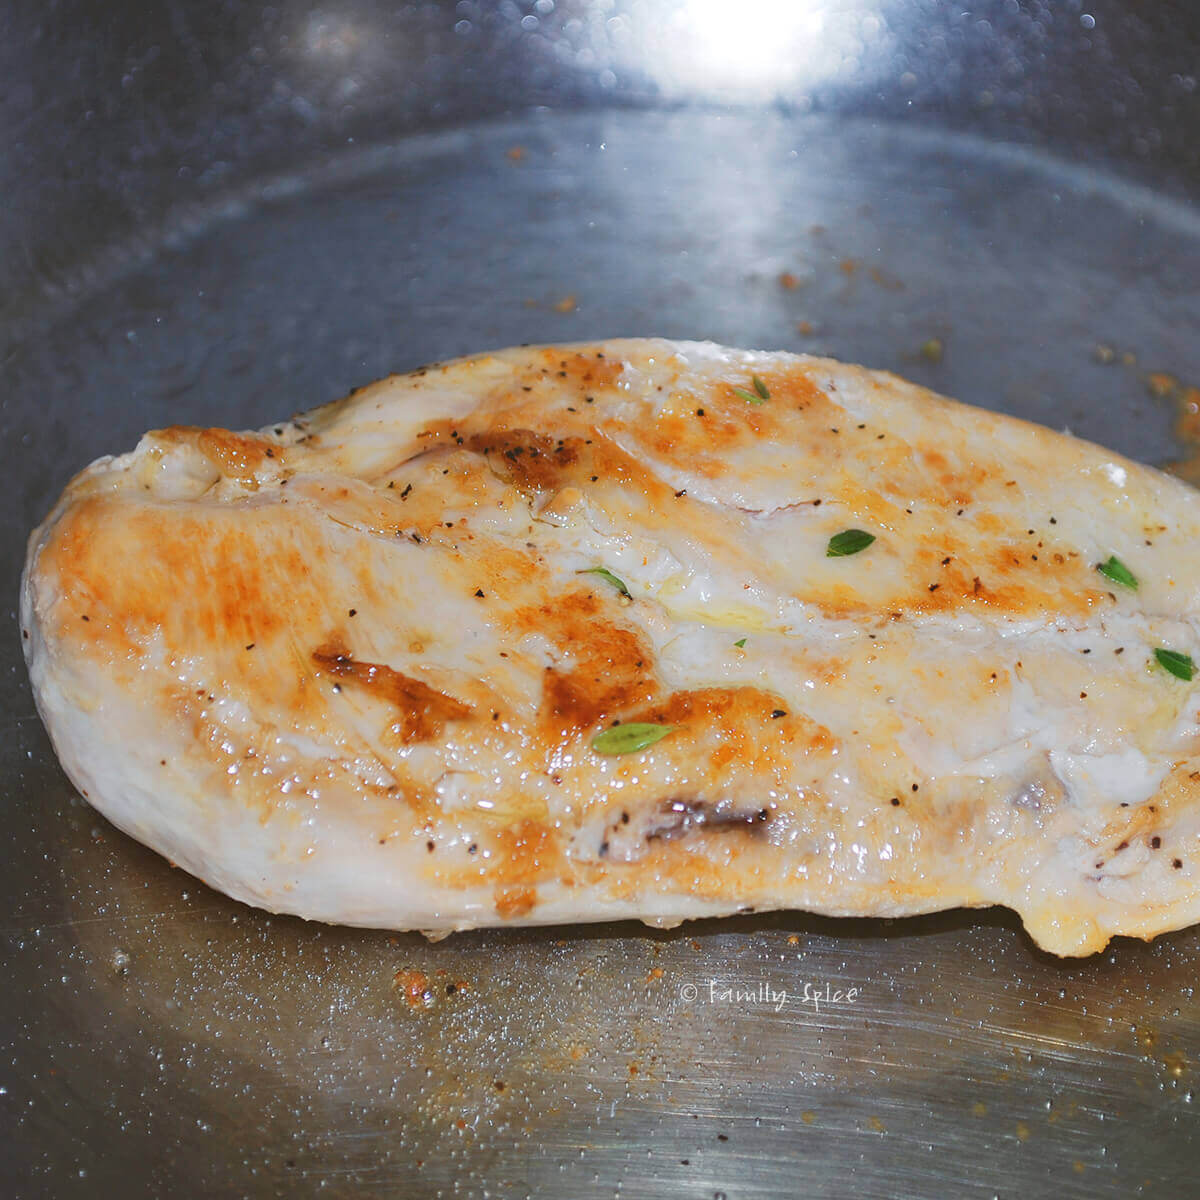 A chicken breast browned in a stainless pan